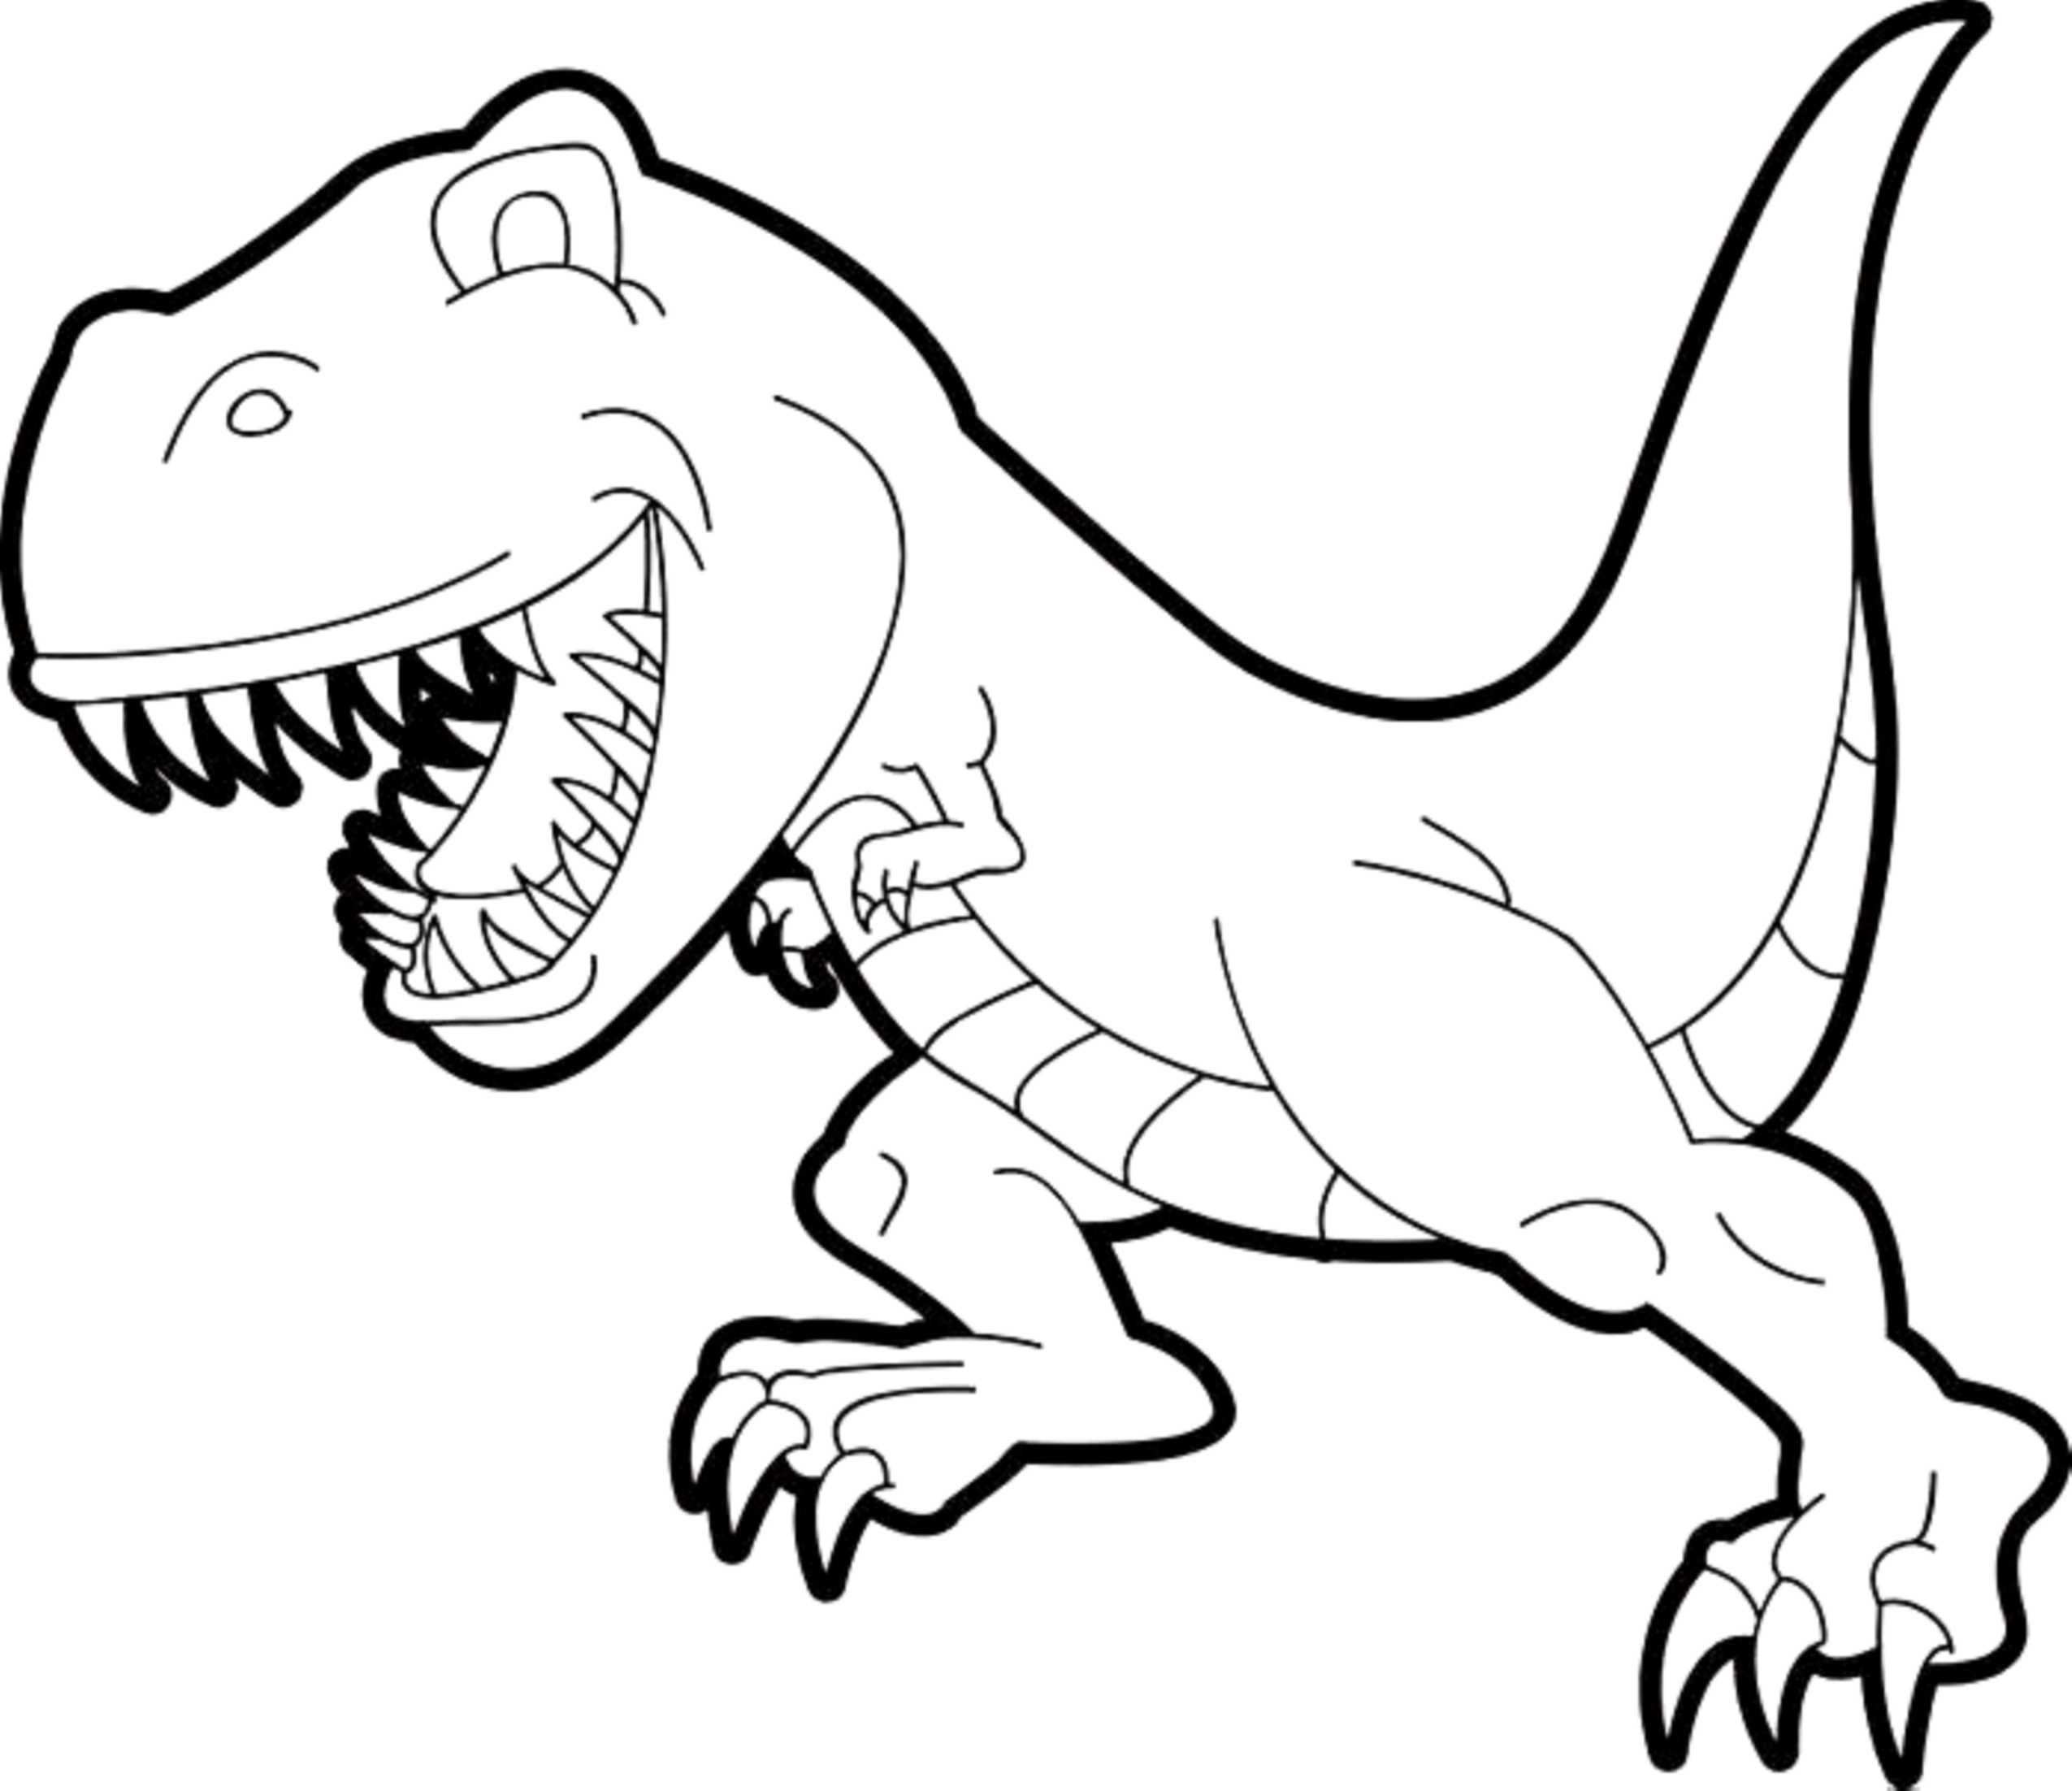 T Rex Coloring Pages Dinosaur Coloring Pages Dinosaur Coloring